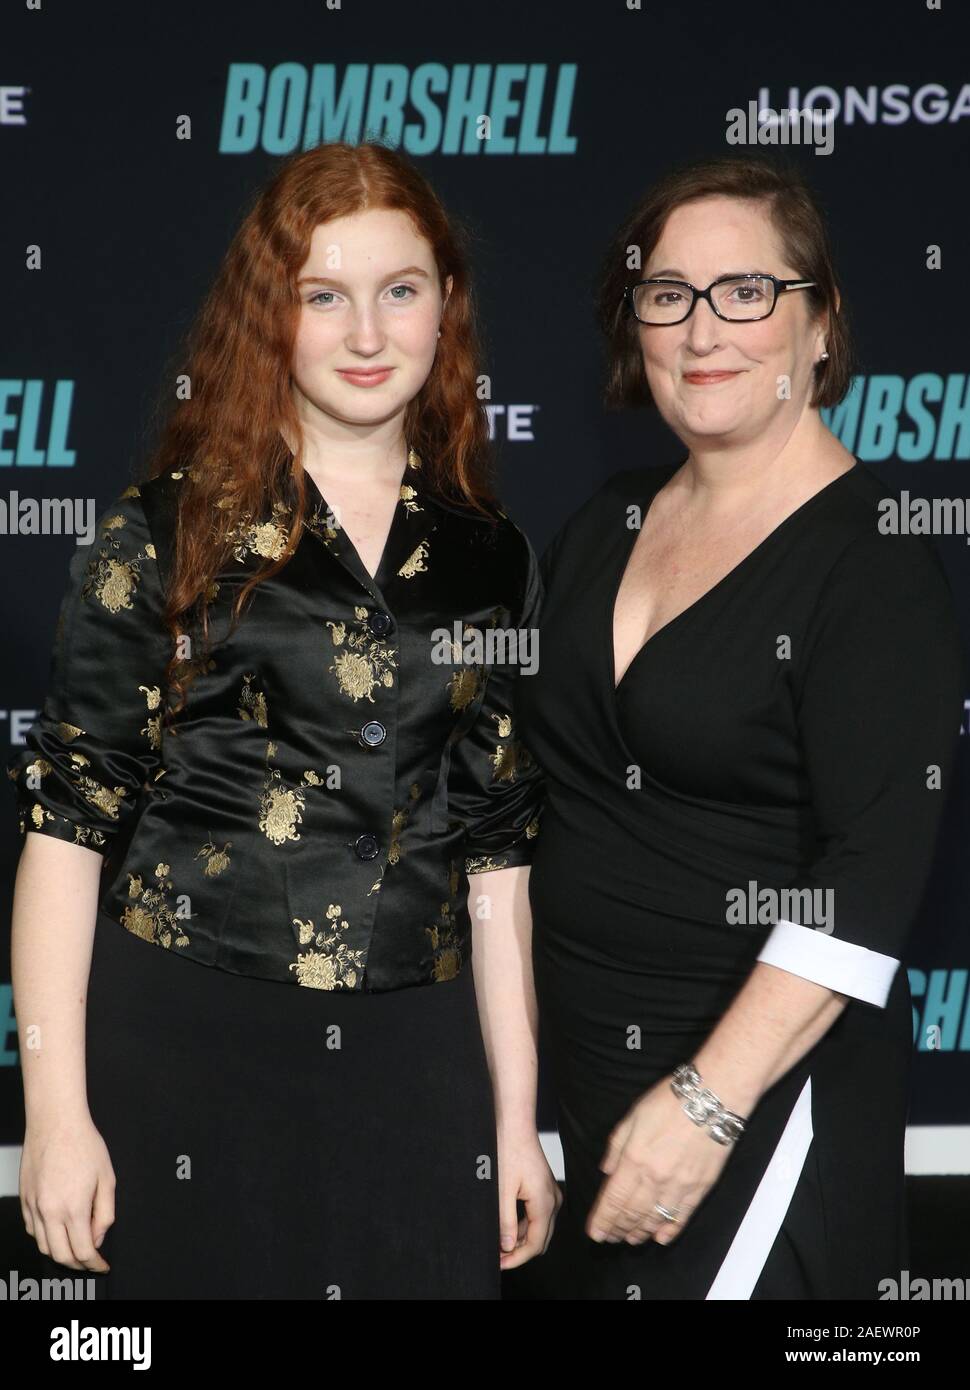 Los Angeles, Ca. 10th Dec, 2019. Hazel Armenante, Jillian Armenante, at the Special Screening of Bombshell at the Regency Village in Los Angeles, California on December 10, 2019. Credit: Faye Sadou/Media Punch/Alamy Live News Stock Photo